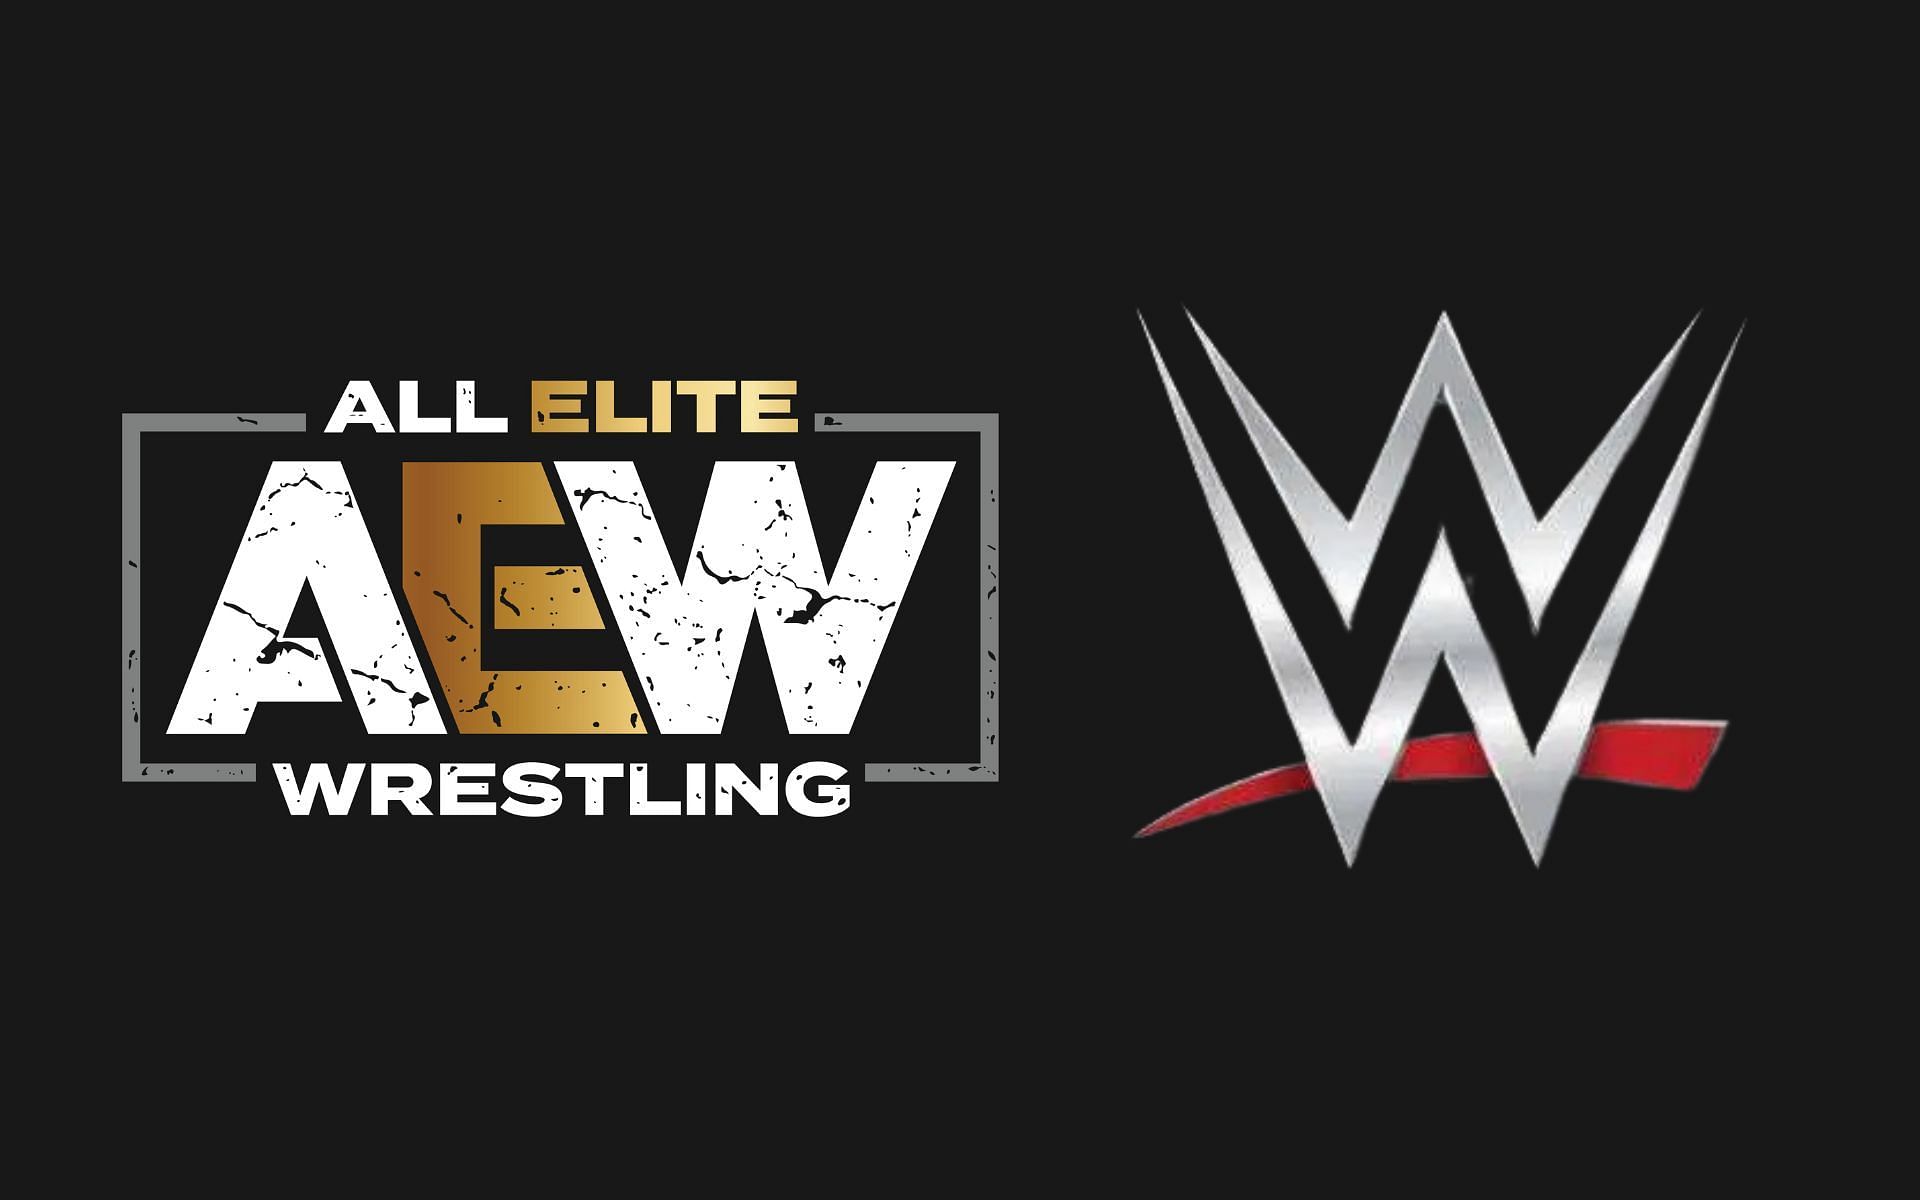 AEW has acquired multiple former WWE talents in the last couple of years